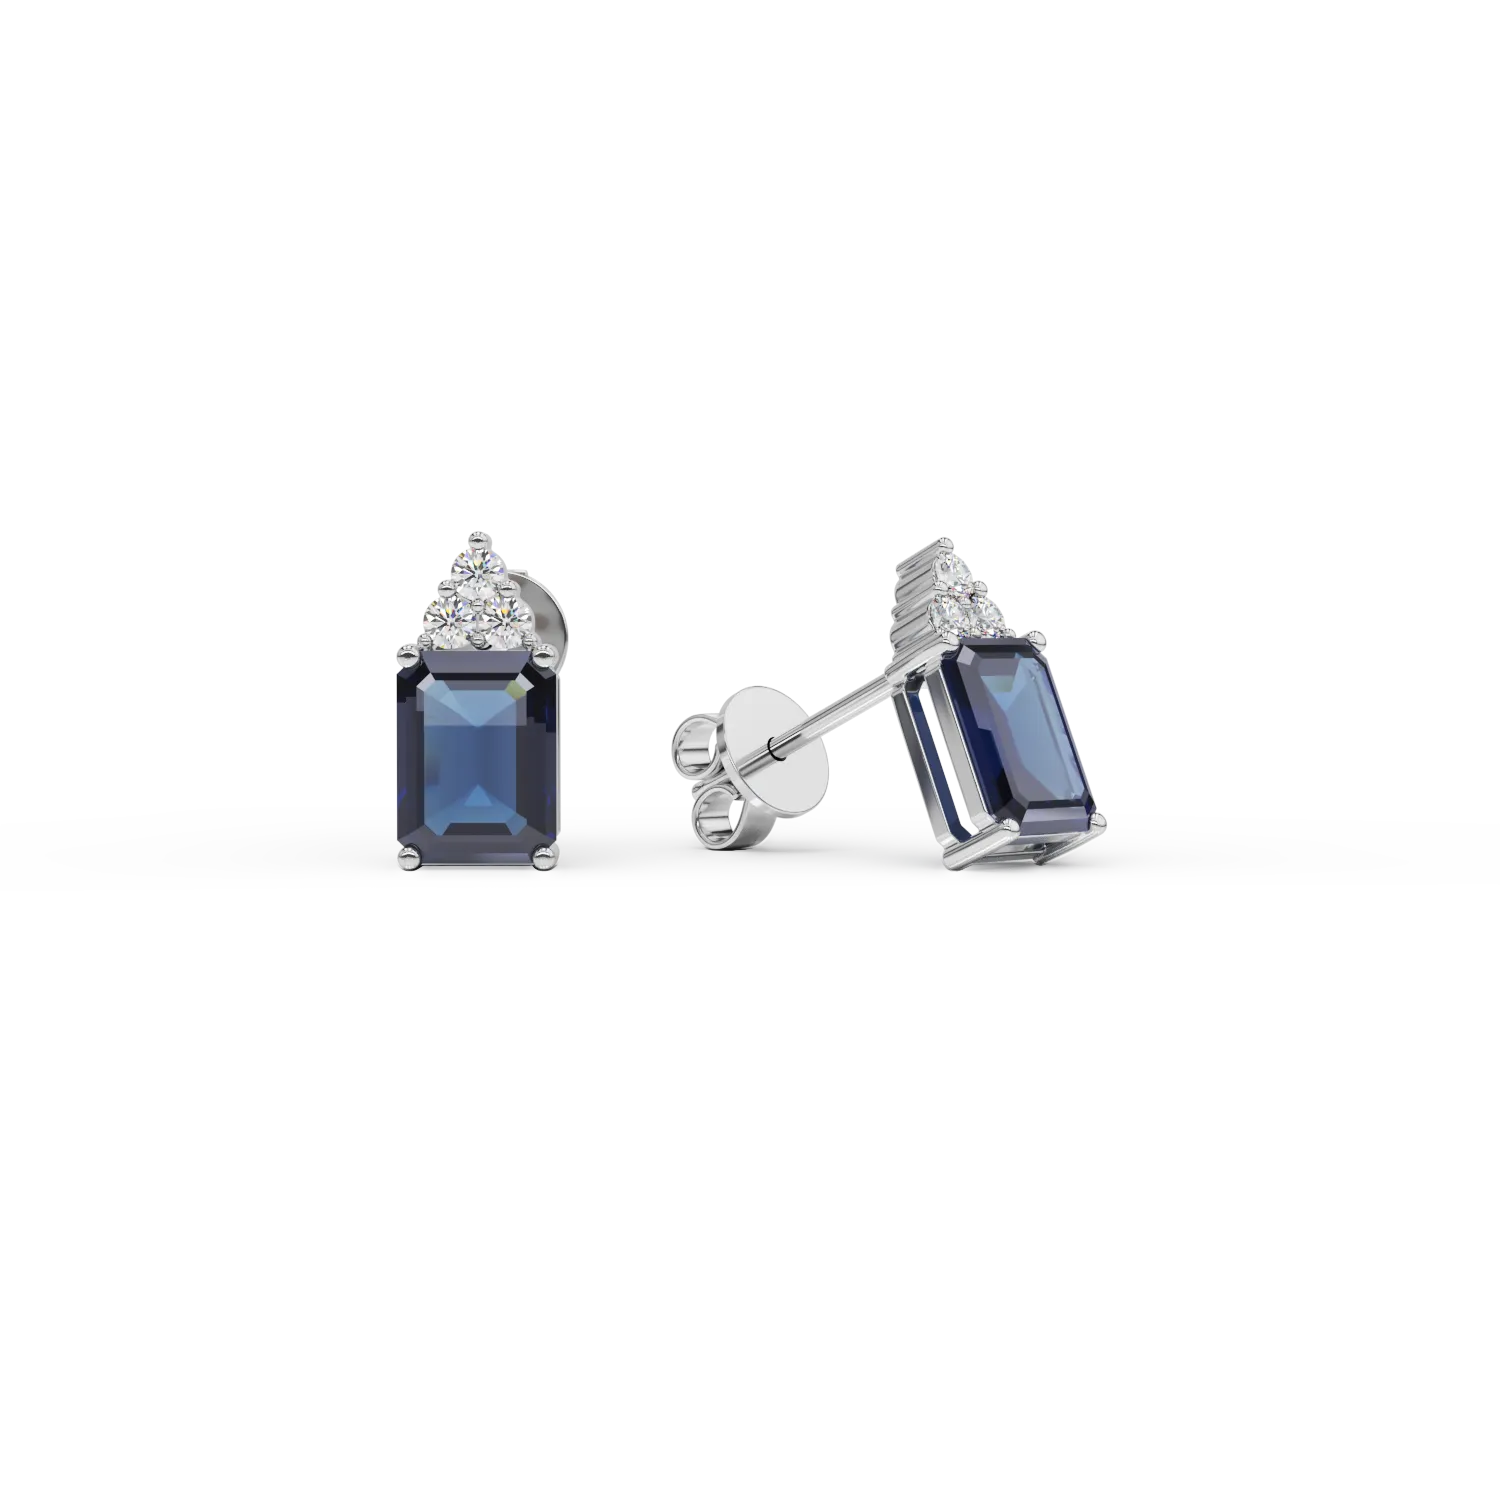 14K white gold earrings with 1.96ct treated sapphires and 0.13ct diamonds